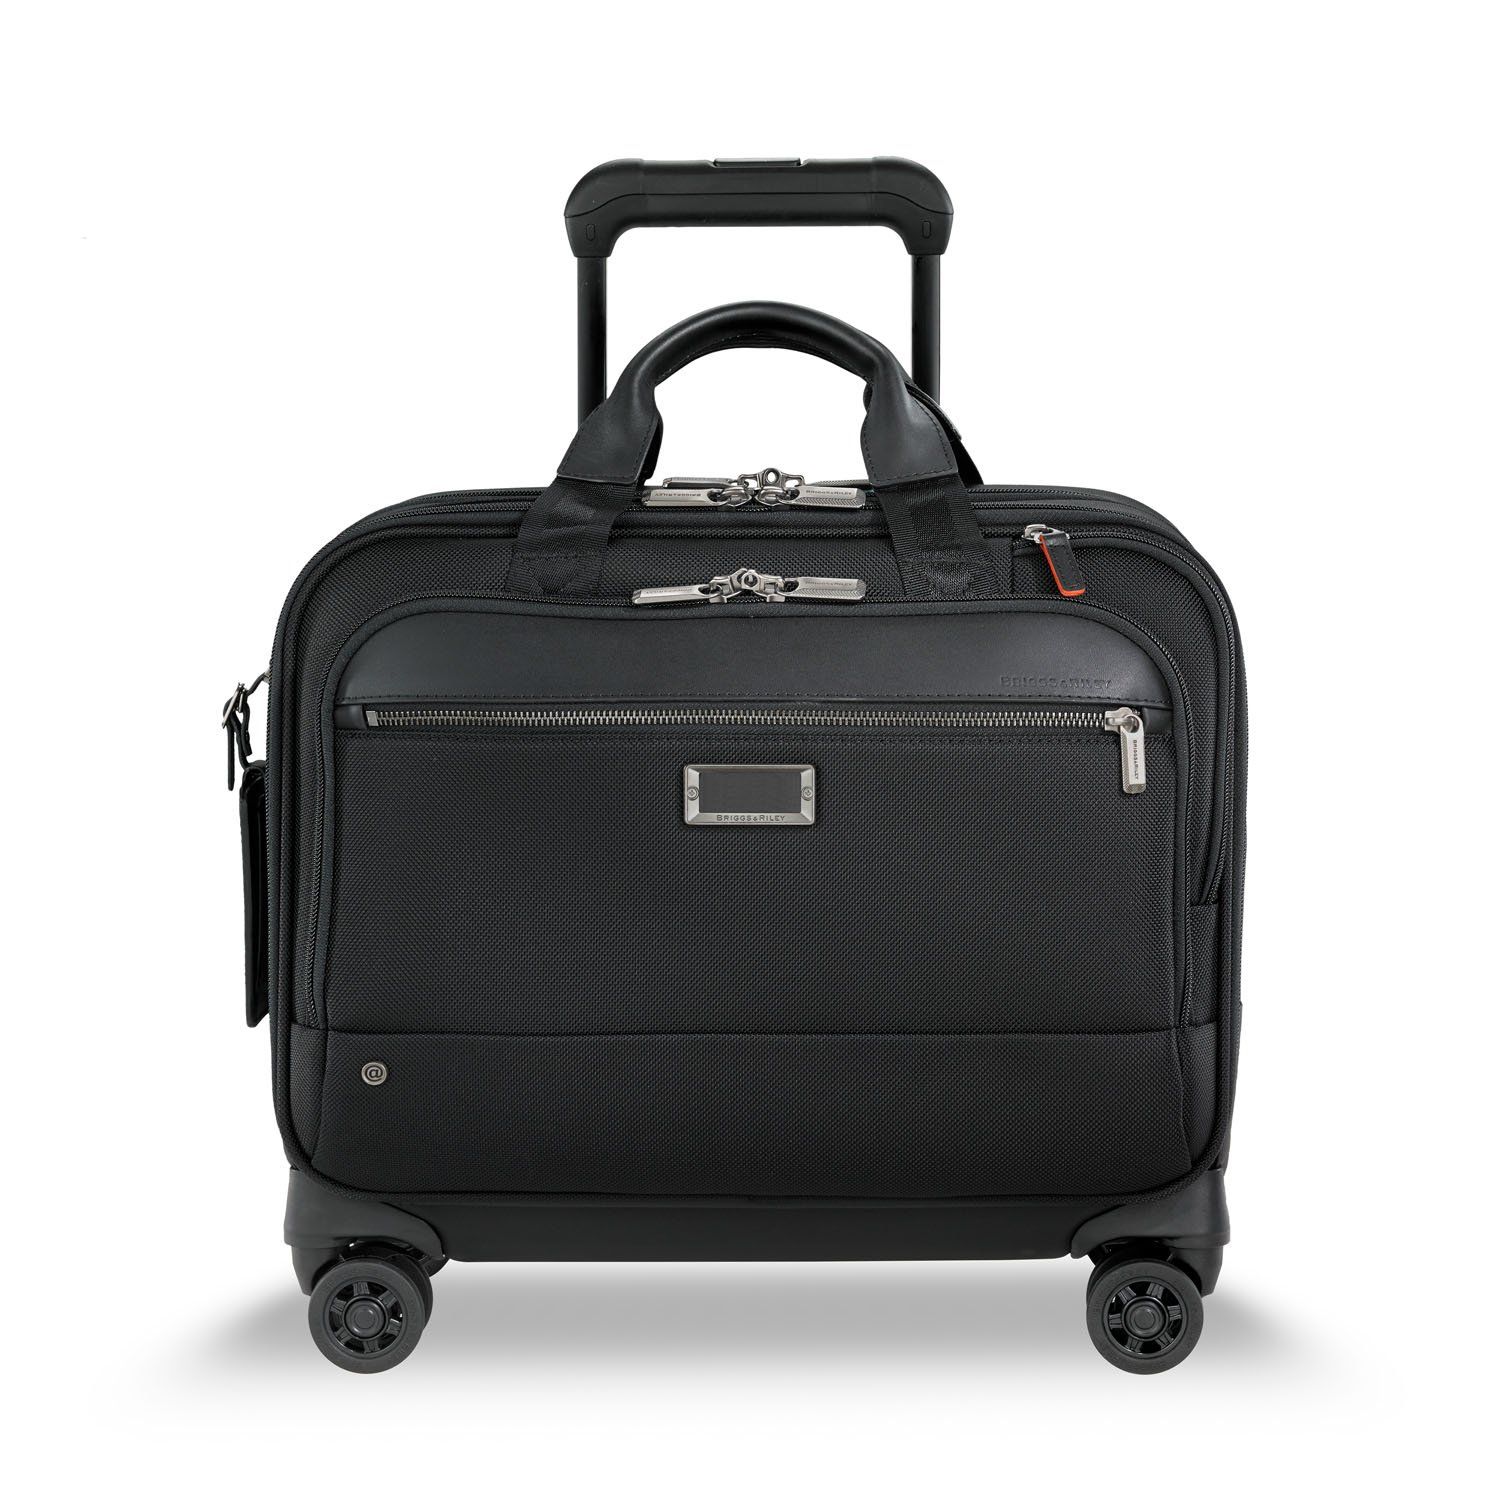 Why carry when you can roll? The @work Medium Spinner Brief effortlessly glides all your business essentials on 4 wheels, so you have 360° of movement for 365 days of productivity. Accommodates most 15.6